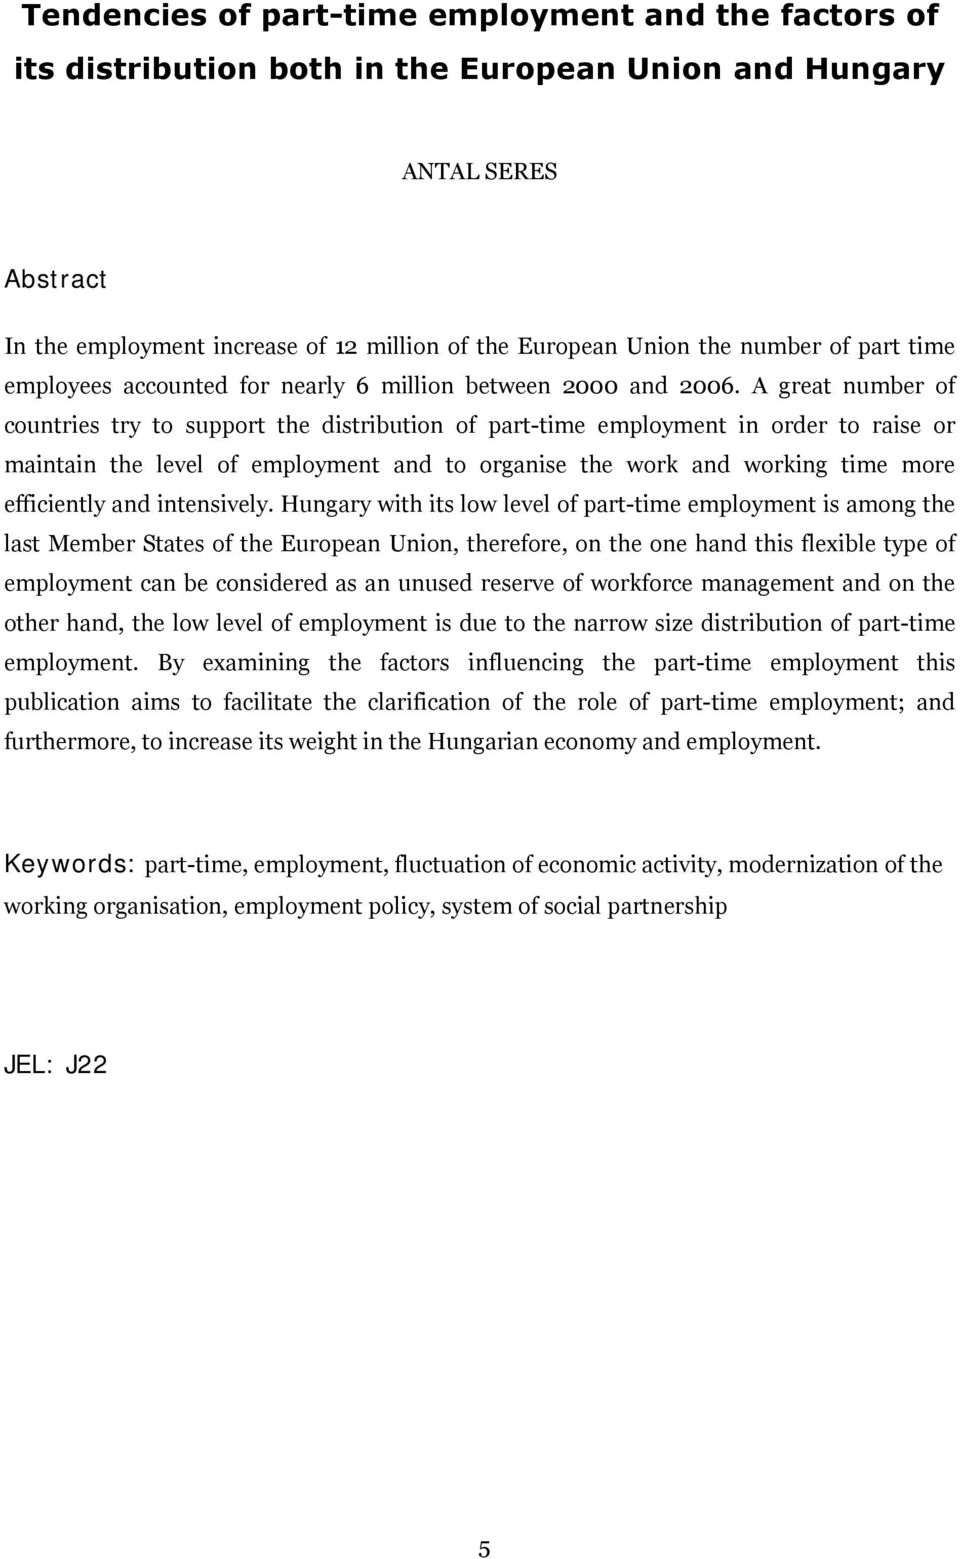 A great number of countries try to support the distribution of part-time employment in order to raise or maintain the level of employment and to organise the work and working time more efficiently